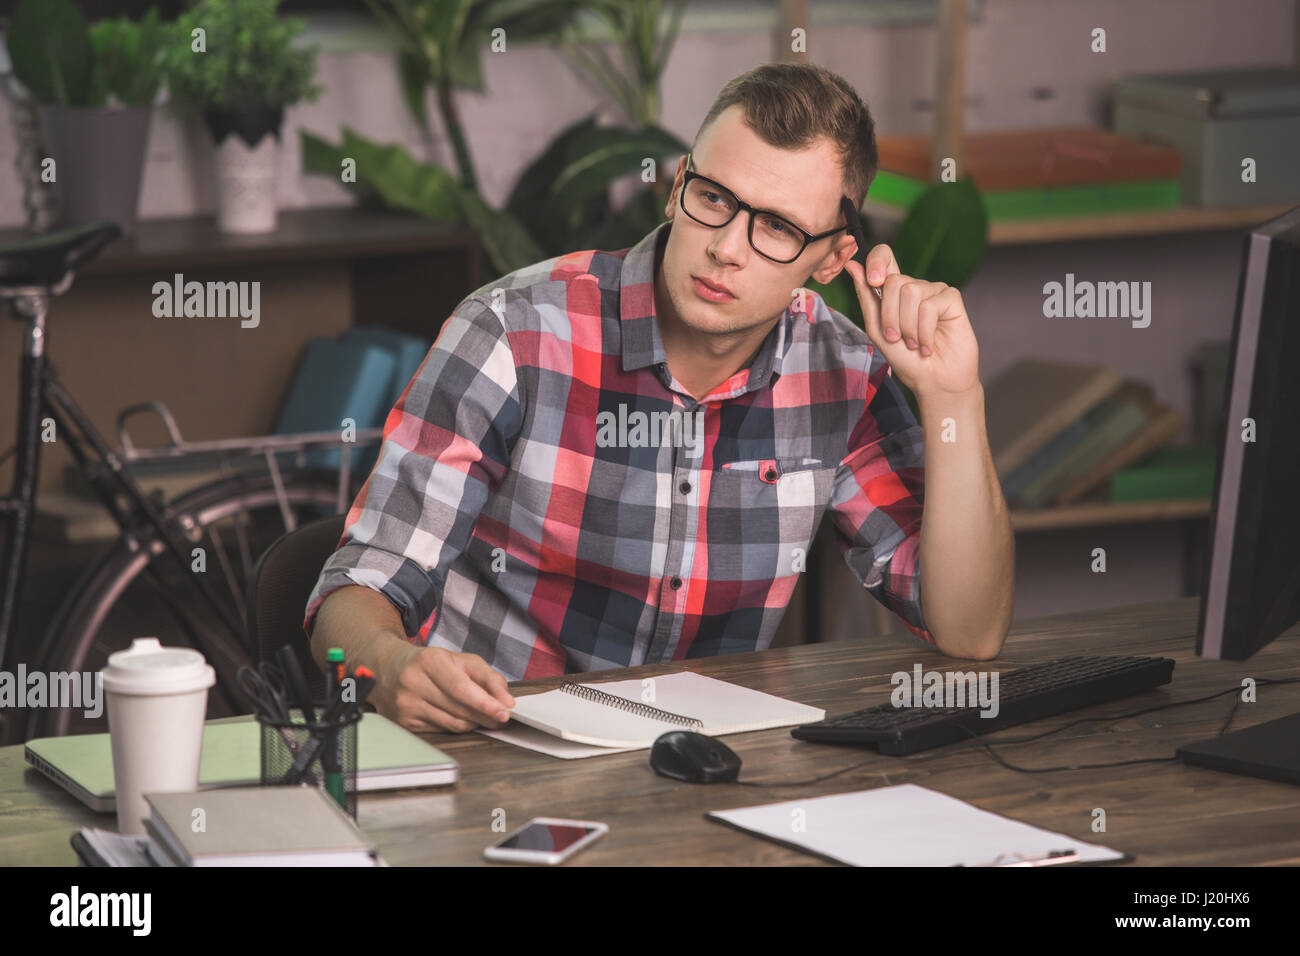 Young Man Programmer Computer Technology Work Concept  Stock Photo